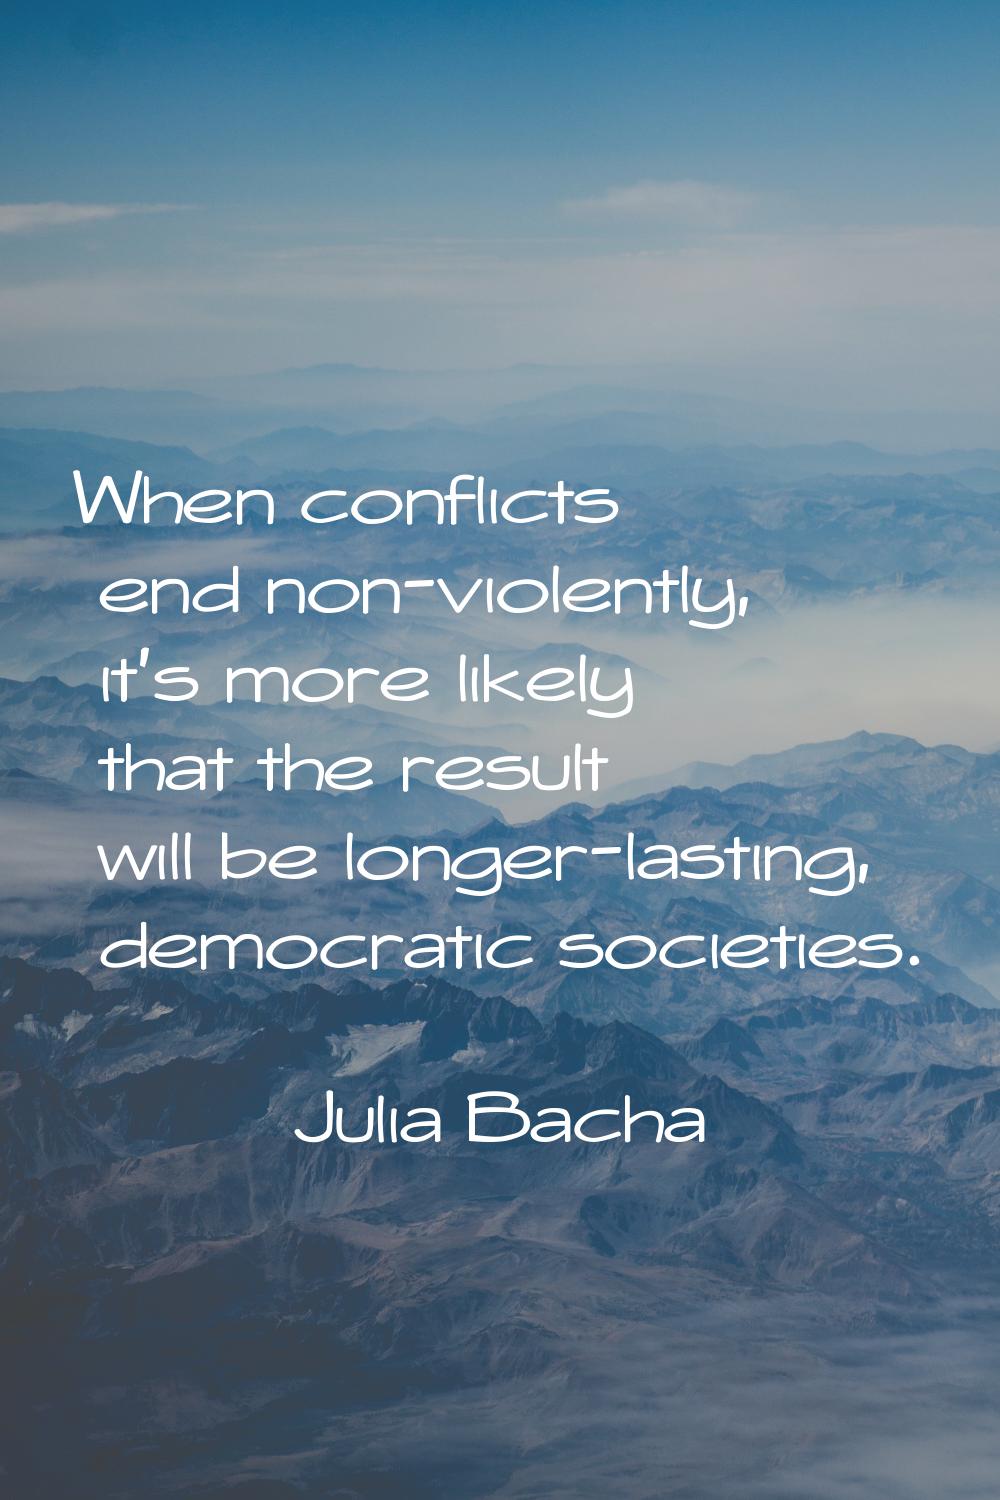 When conflicts end non-violently, it's more likely that the result will be longer-lasting, democrat